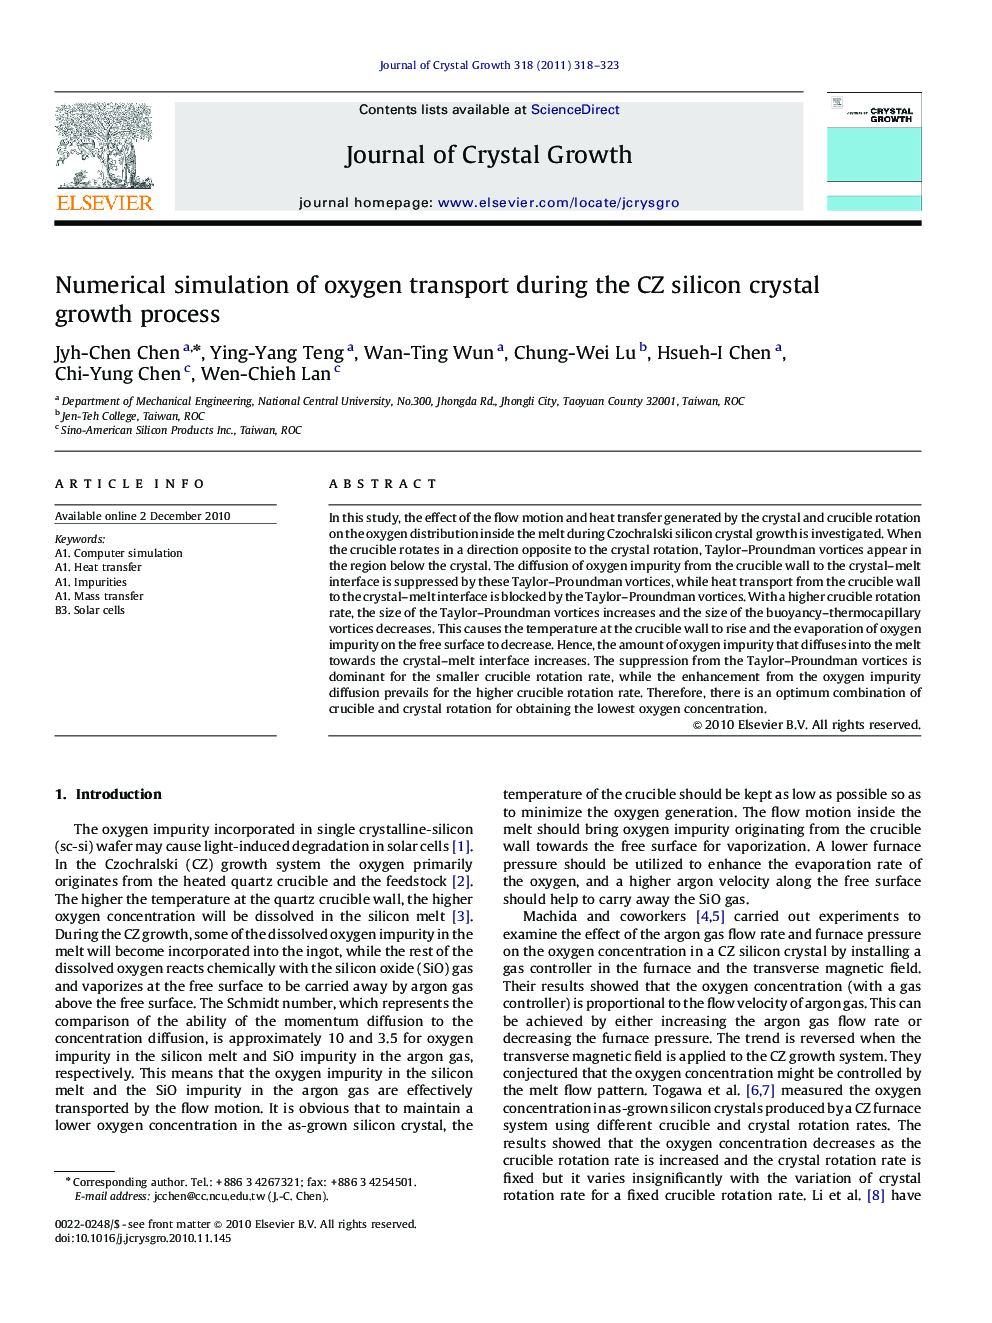 Numerical simulation of oxygen transport during the CZ silicon crystal growth process